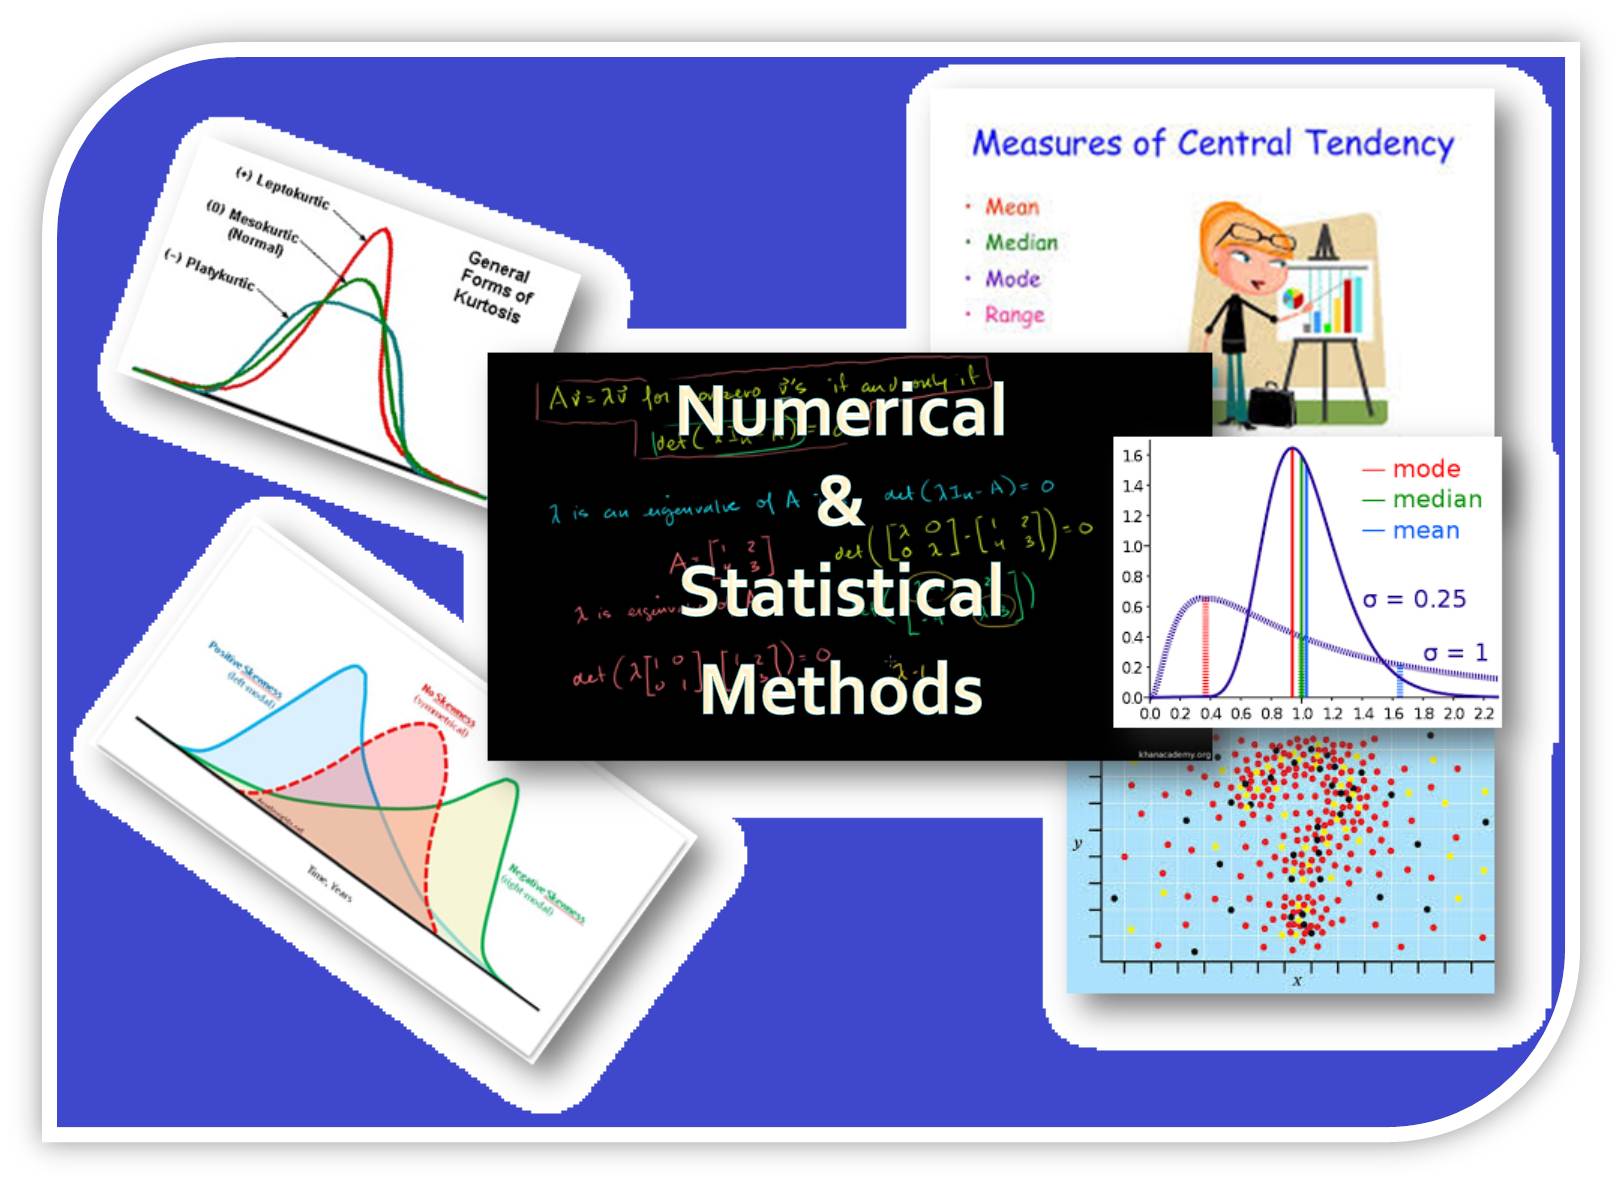 http://study.aisectonline.com/images/Numerical and Statistical Methods.jpg